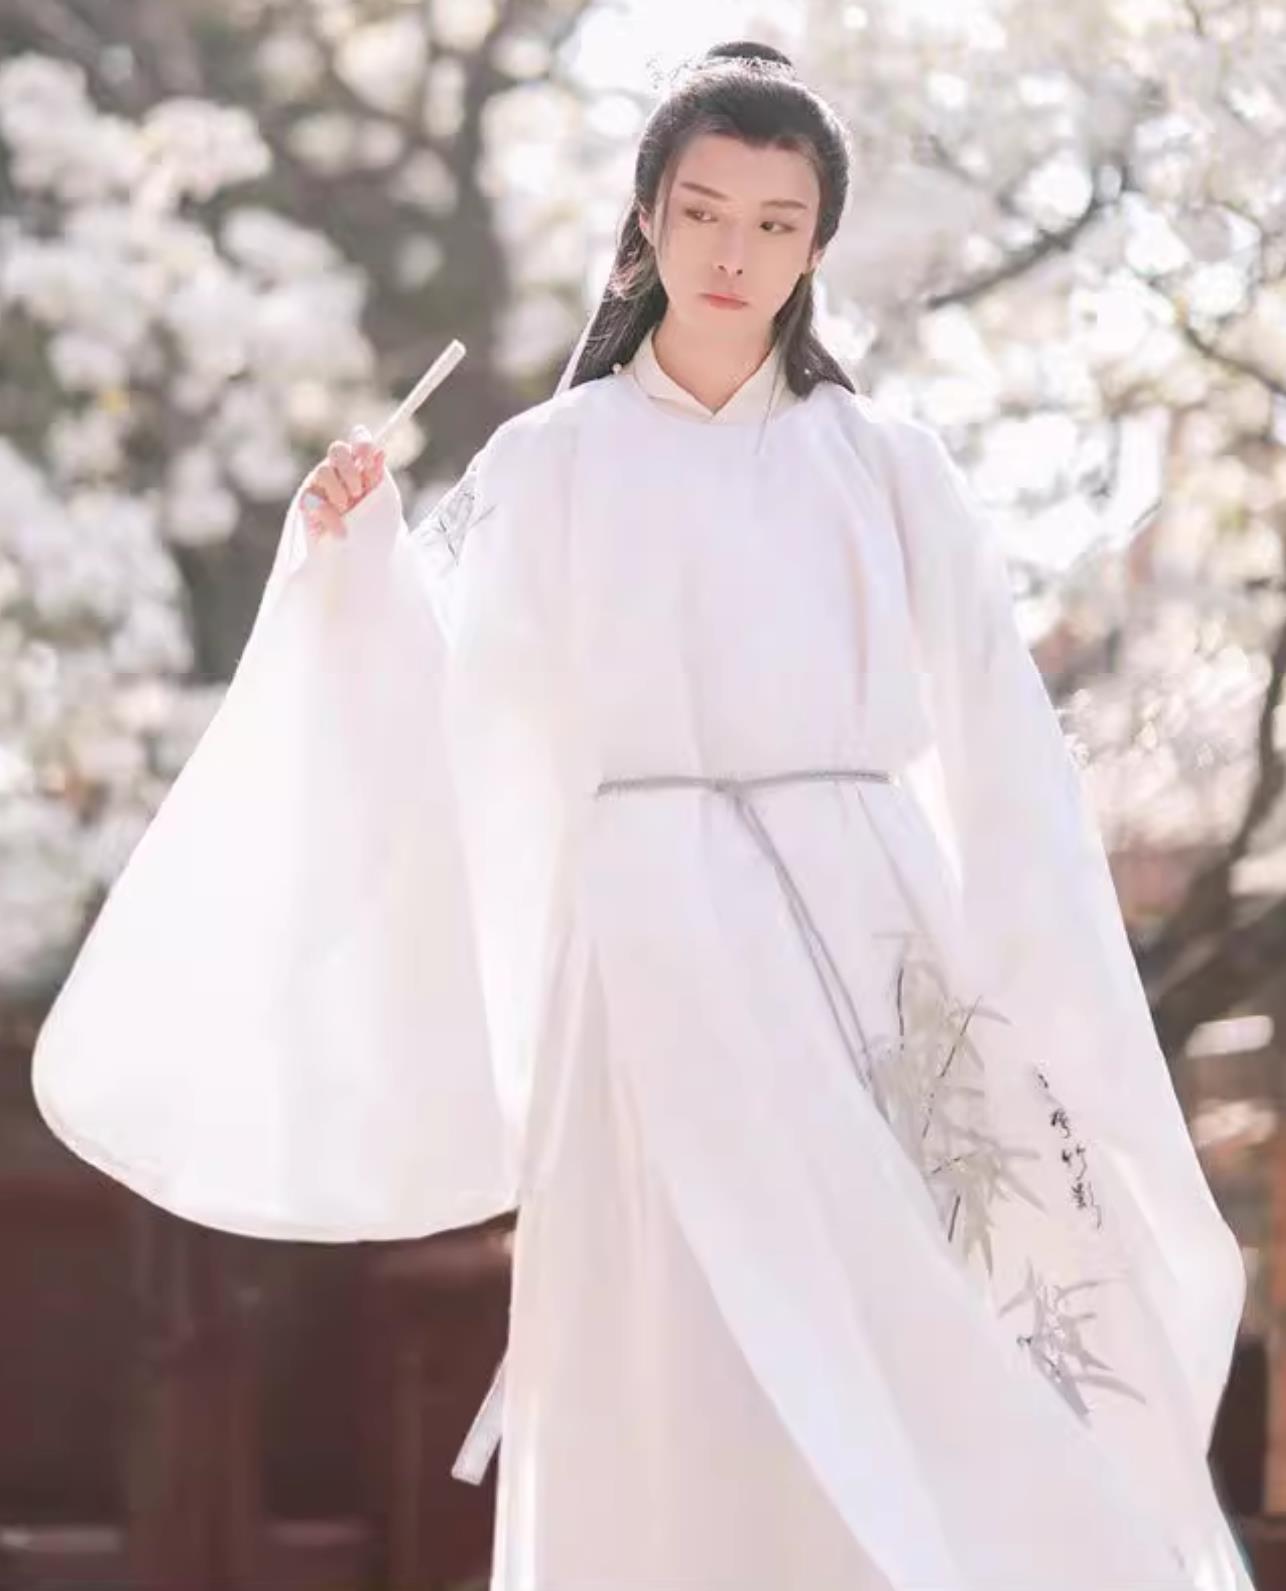 Ancient China Young Childe Clothing China Travel Photography Ming Dynasty Scholar Costume Traditional White Hanfu Robe